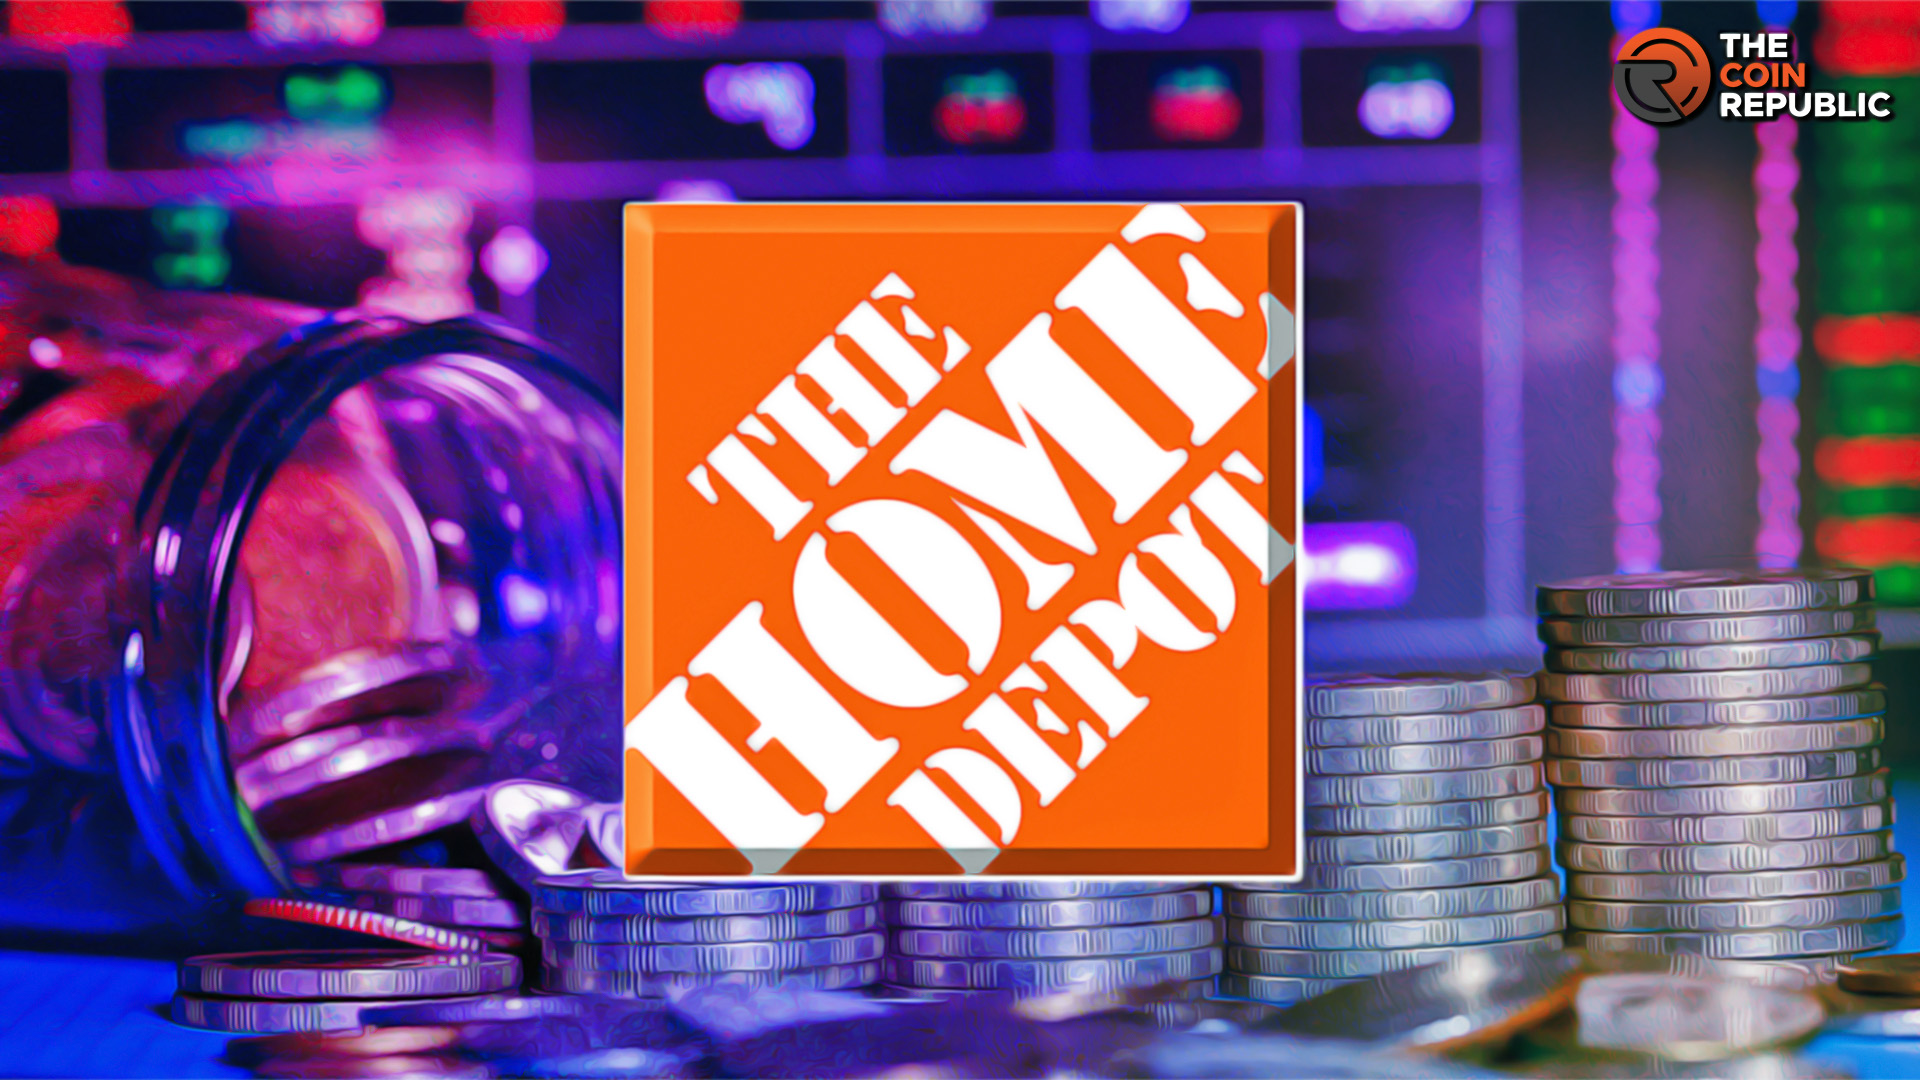 Home Depot Inc. (NYSE: HD): Will HD Stock Price Slip Now?